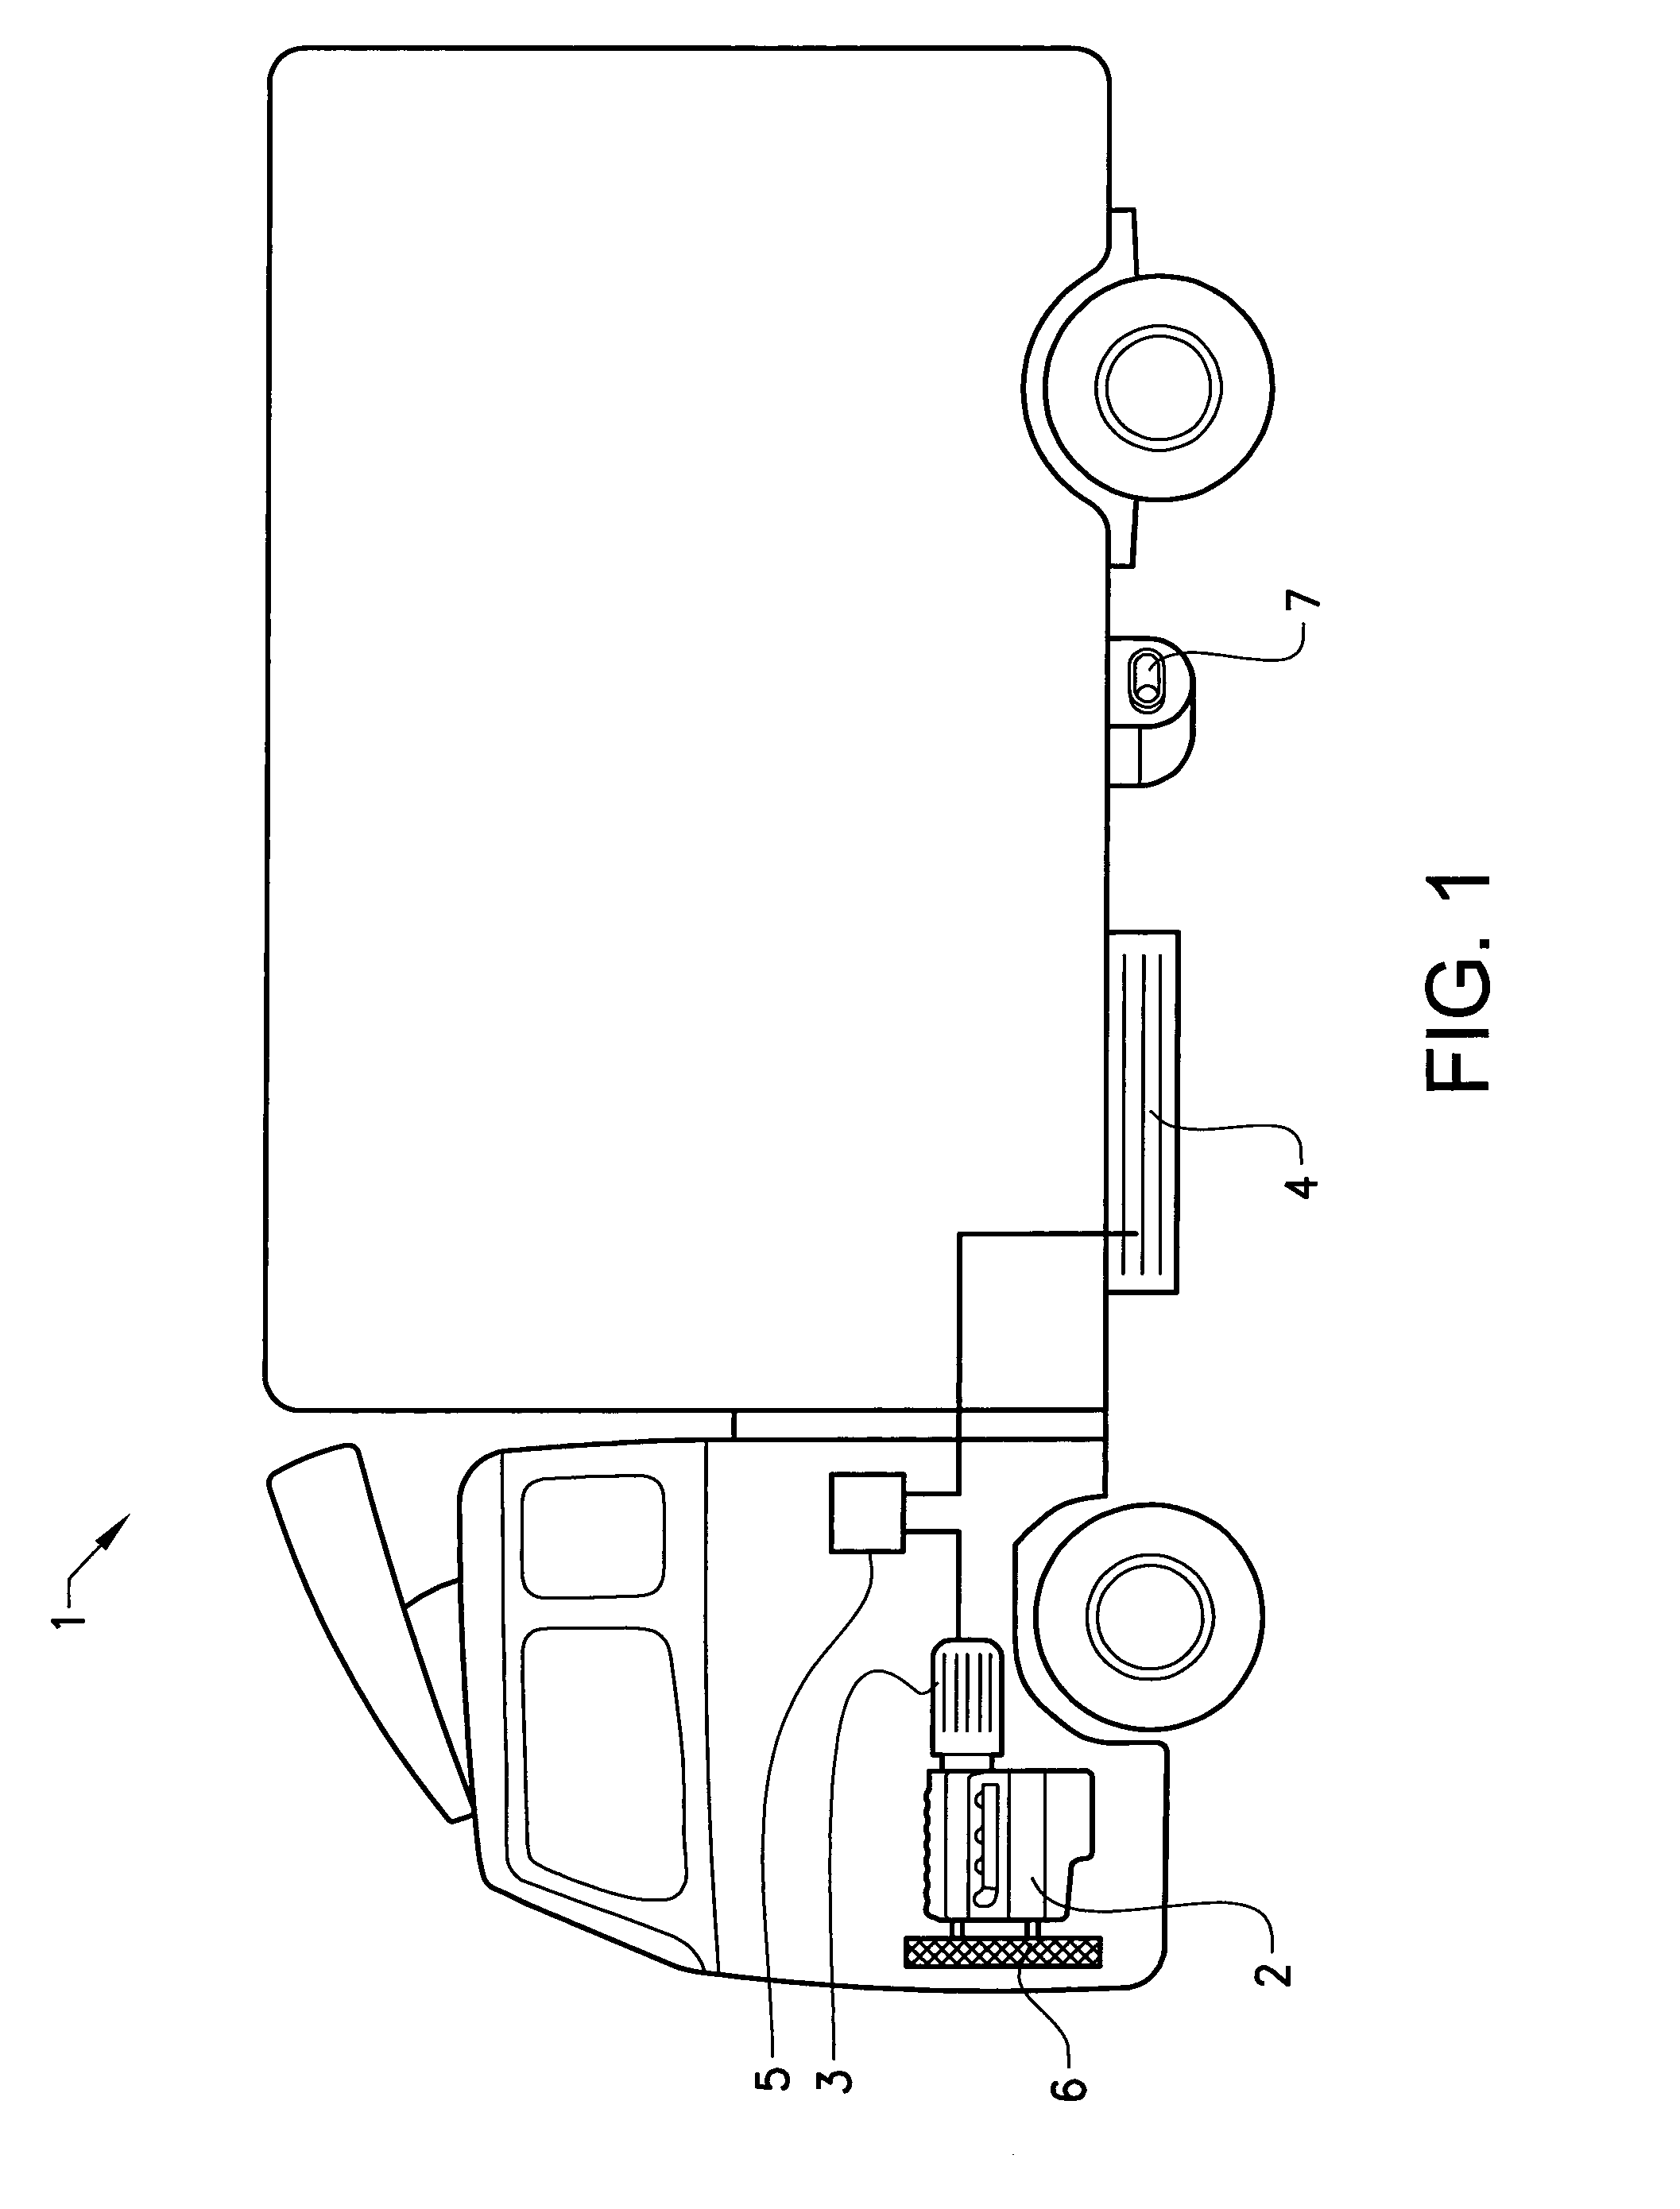 Method for monitoring state of health of a vehicle system